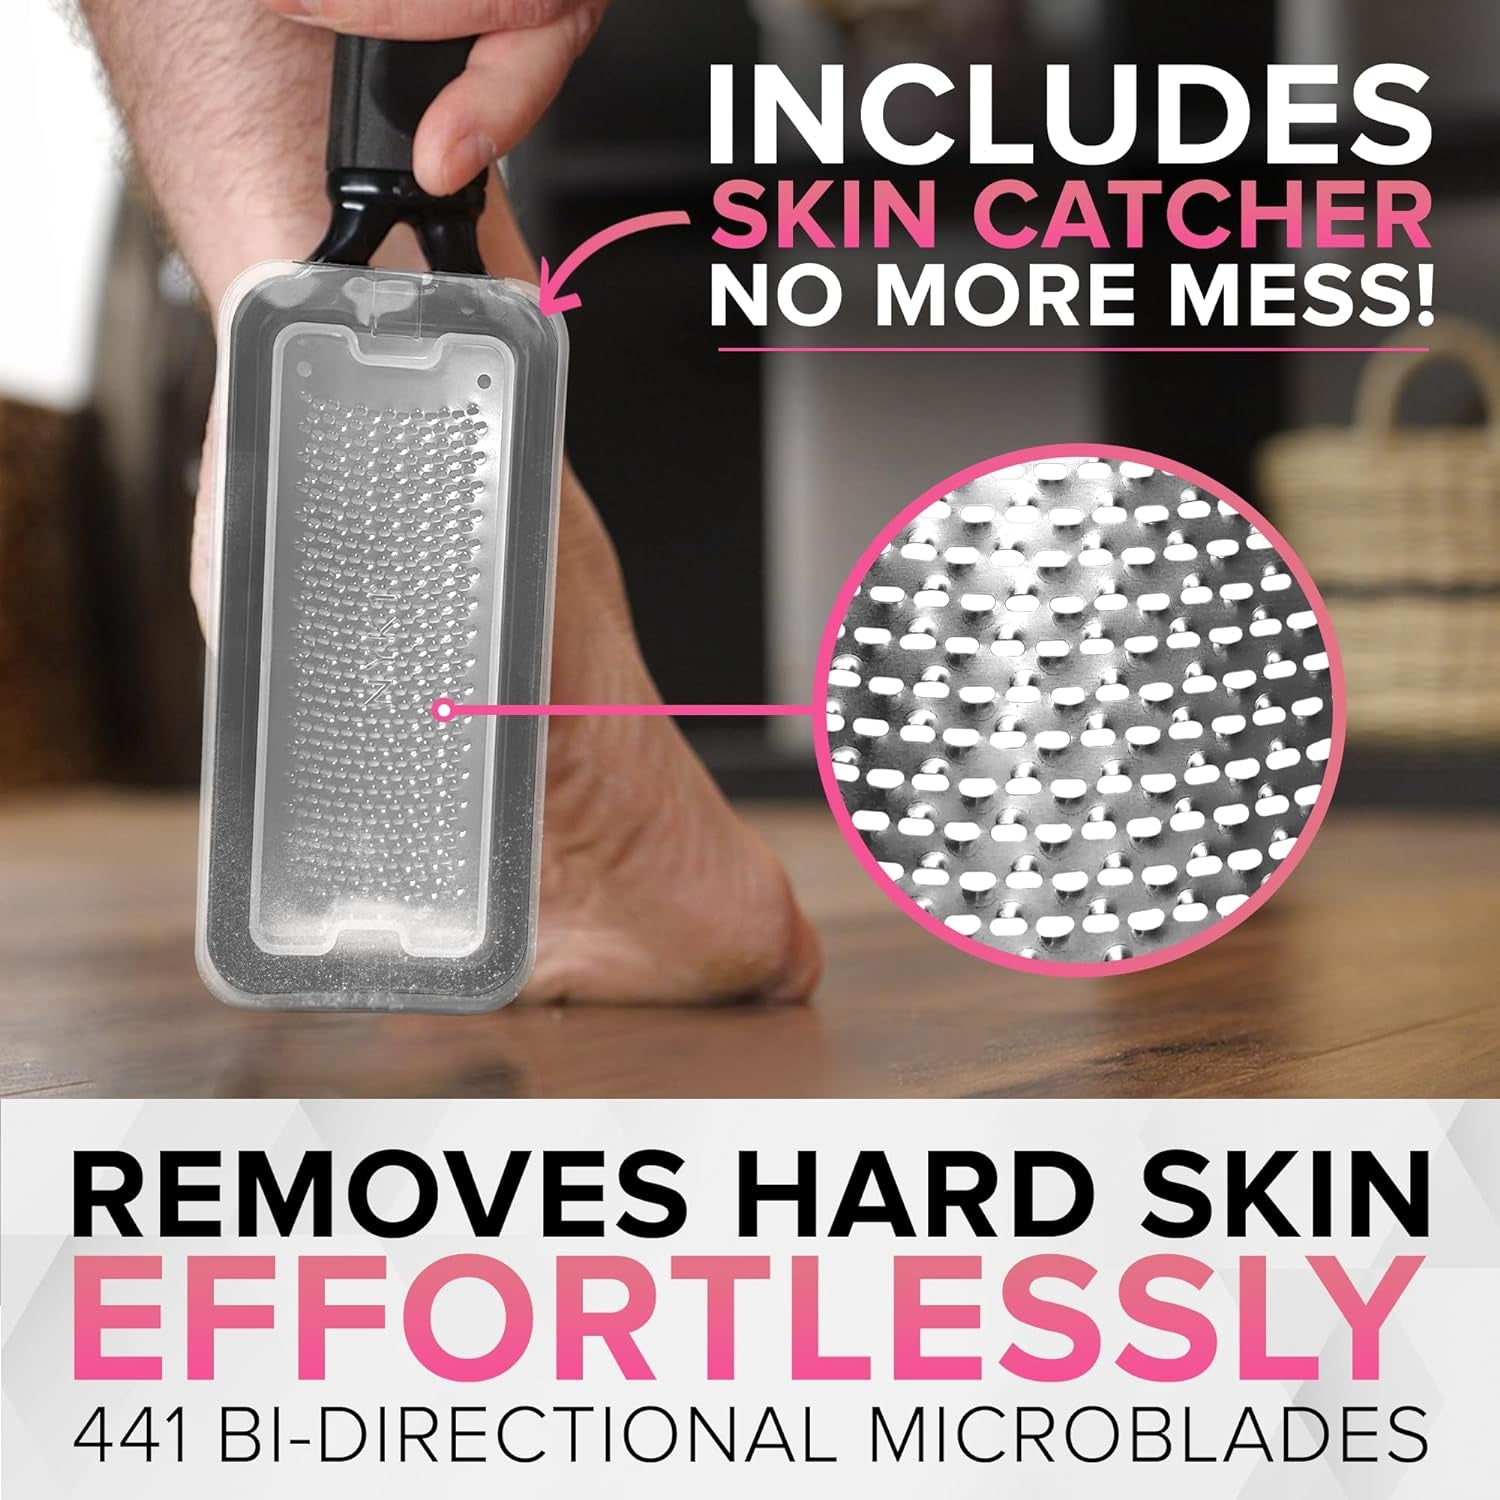 PEDICURE Foot File Callus Remover for Feet with Skin Catcher (XL Size)  Foot Scrubber Feet Scrubber Dead Skin Remover for Feet Foot Scraper - Hard Skin Foot Callus Remover Tool Feet Callus Remover